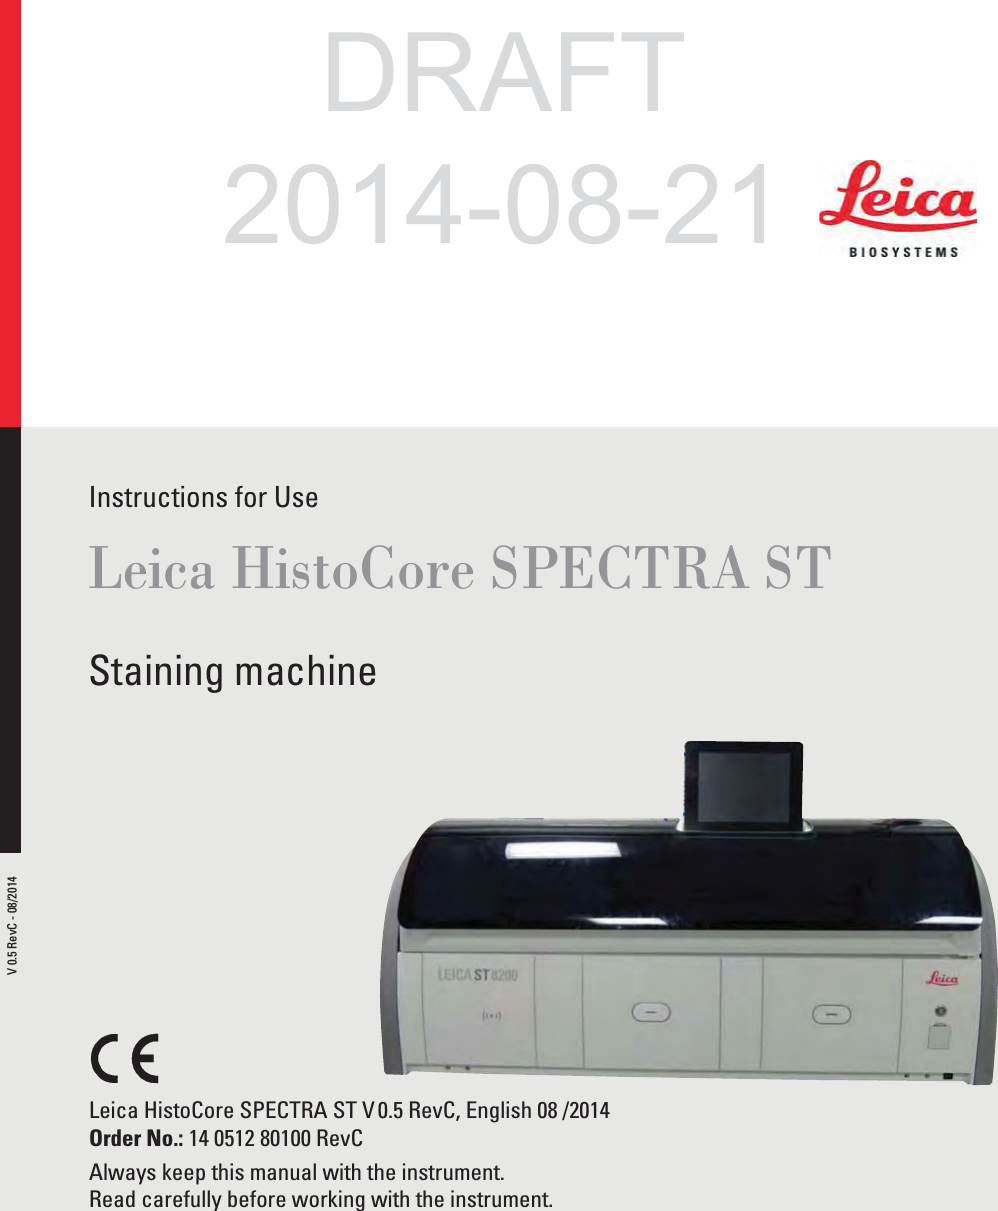 Instructions for UseLeica HistoCore SPECTRA STStaining machineLeica HistoCore SPECTRA ST V 0.5 RevC, English 08 /2014Order No.: 14 0512 80100 RevCAlways keep this manual with the instrument.Read carefully before working with the instrument.V 0.5 RevC - 08/2014DRAFT2014-08-21